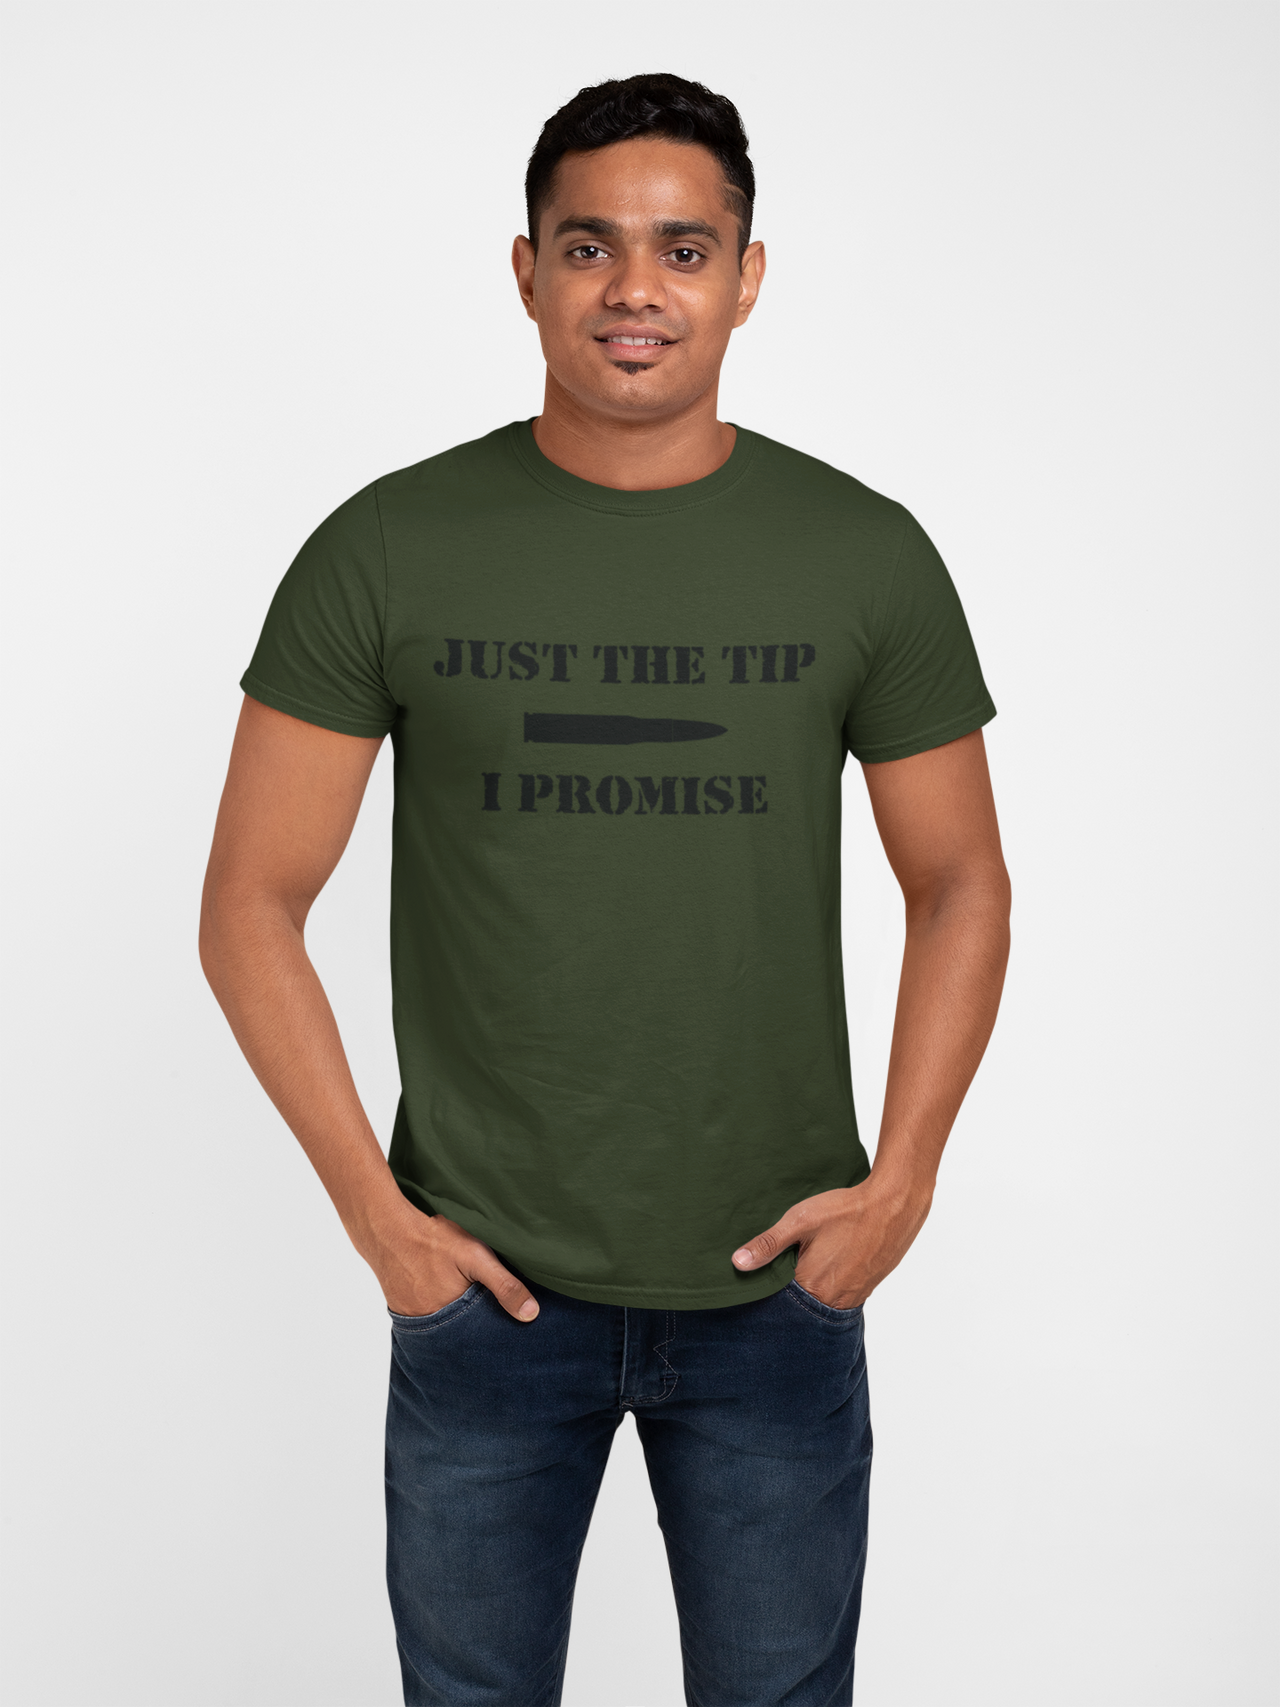 Army T-shirt - Just the Tip, I Promise (Men)